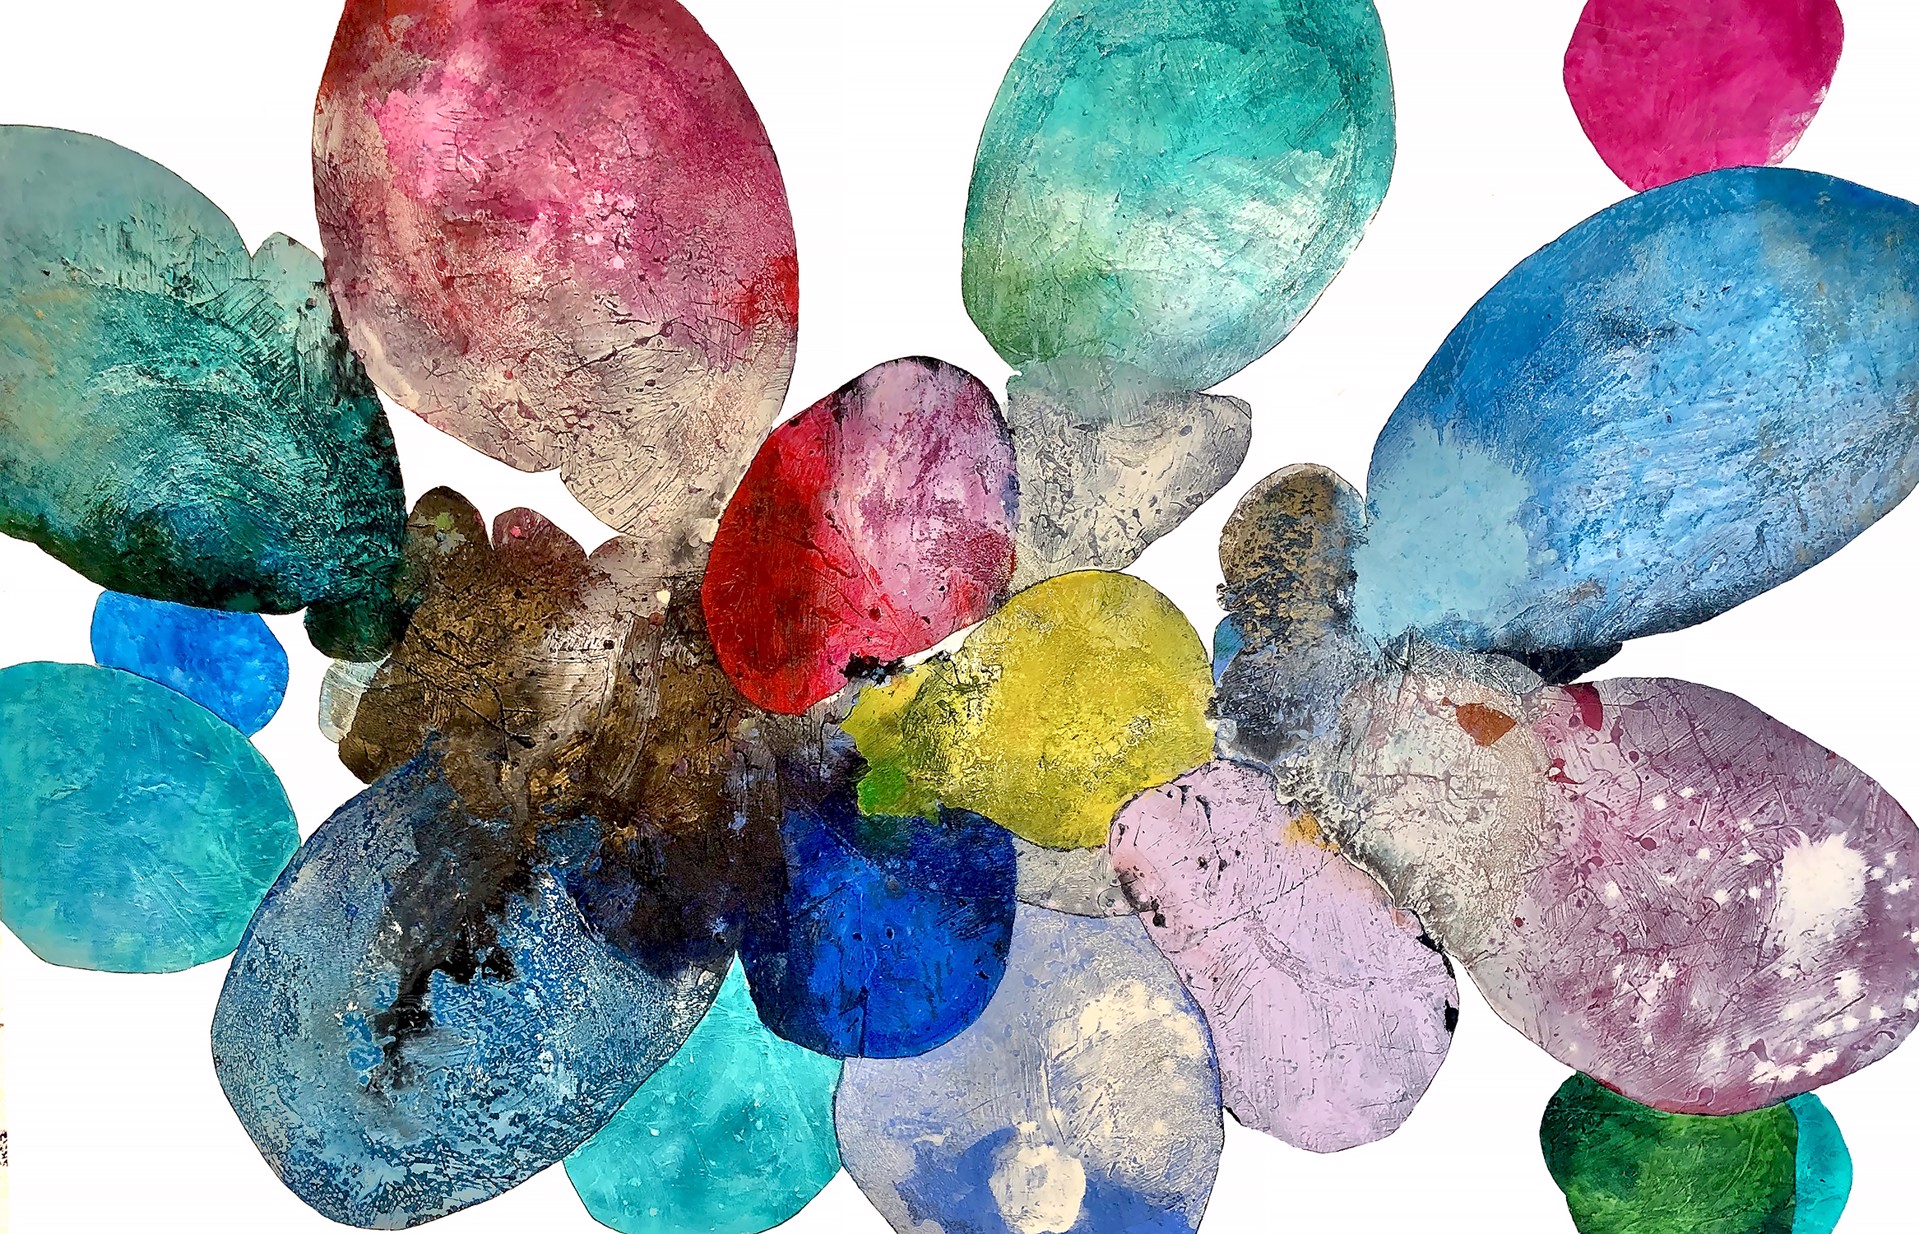 All the Precious Stones III by Meredith Pardue